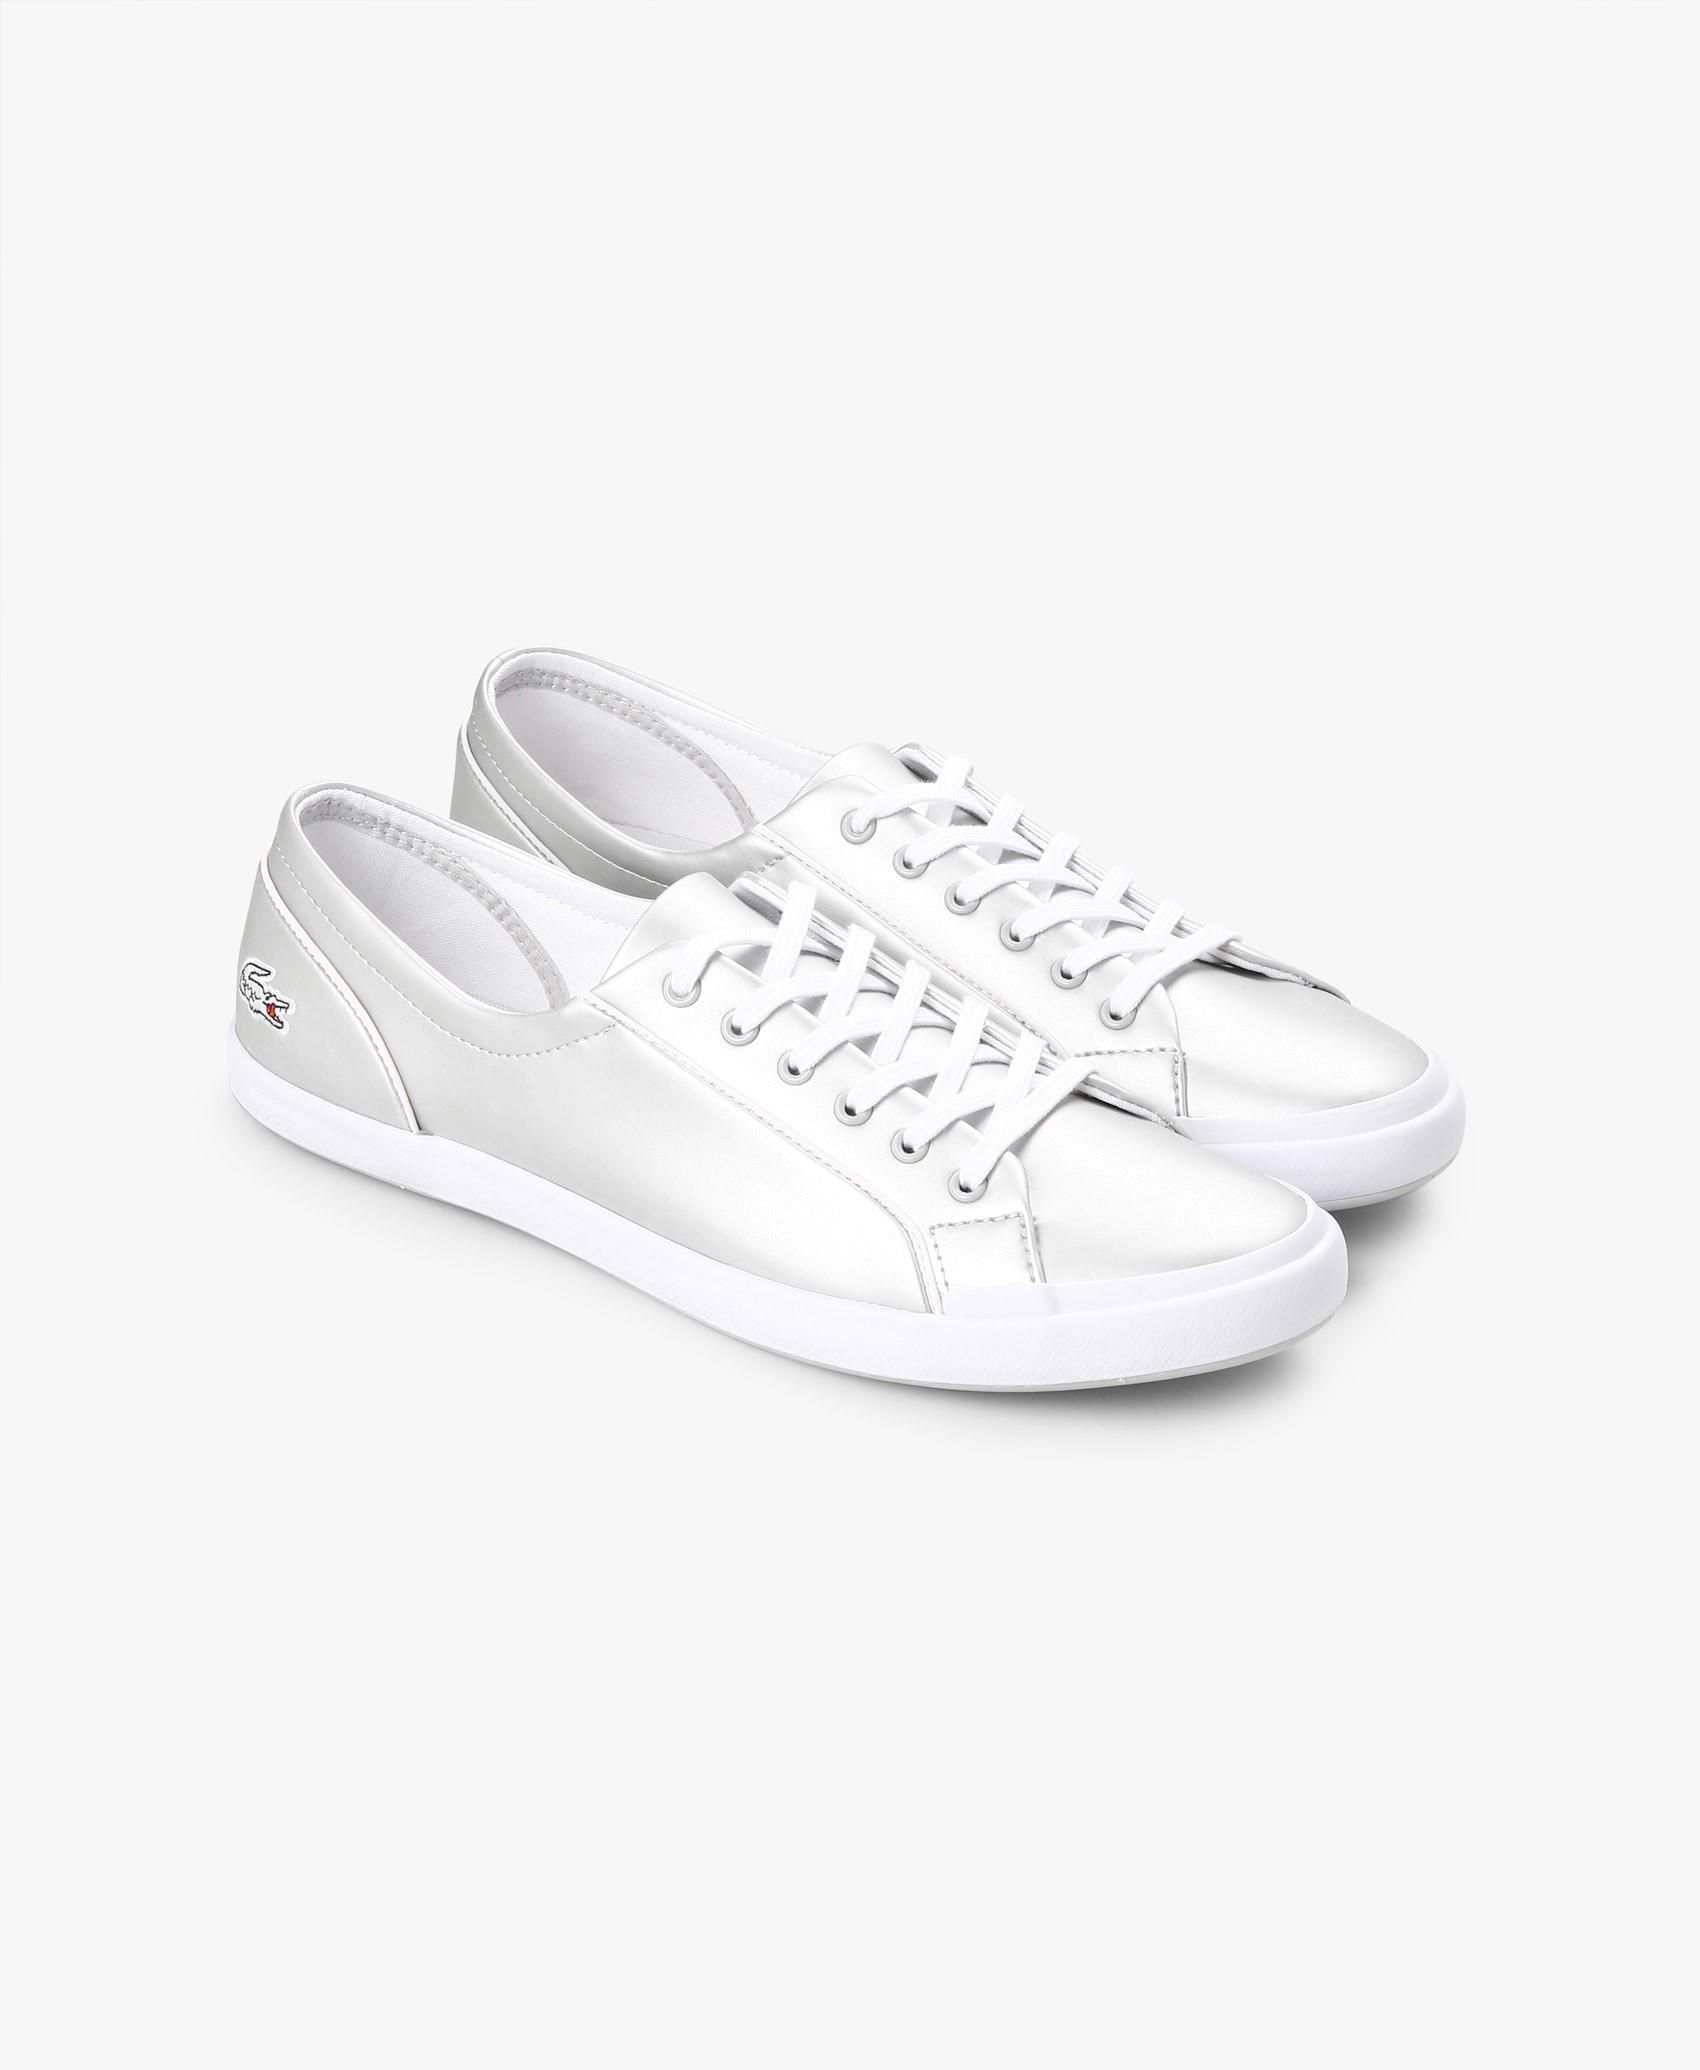 Lancelle Sneakers